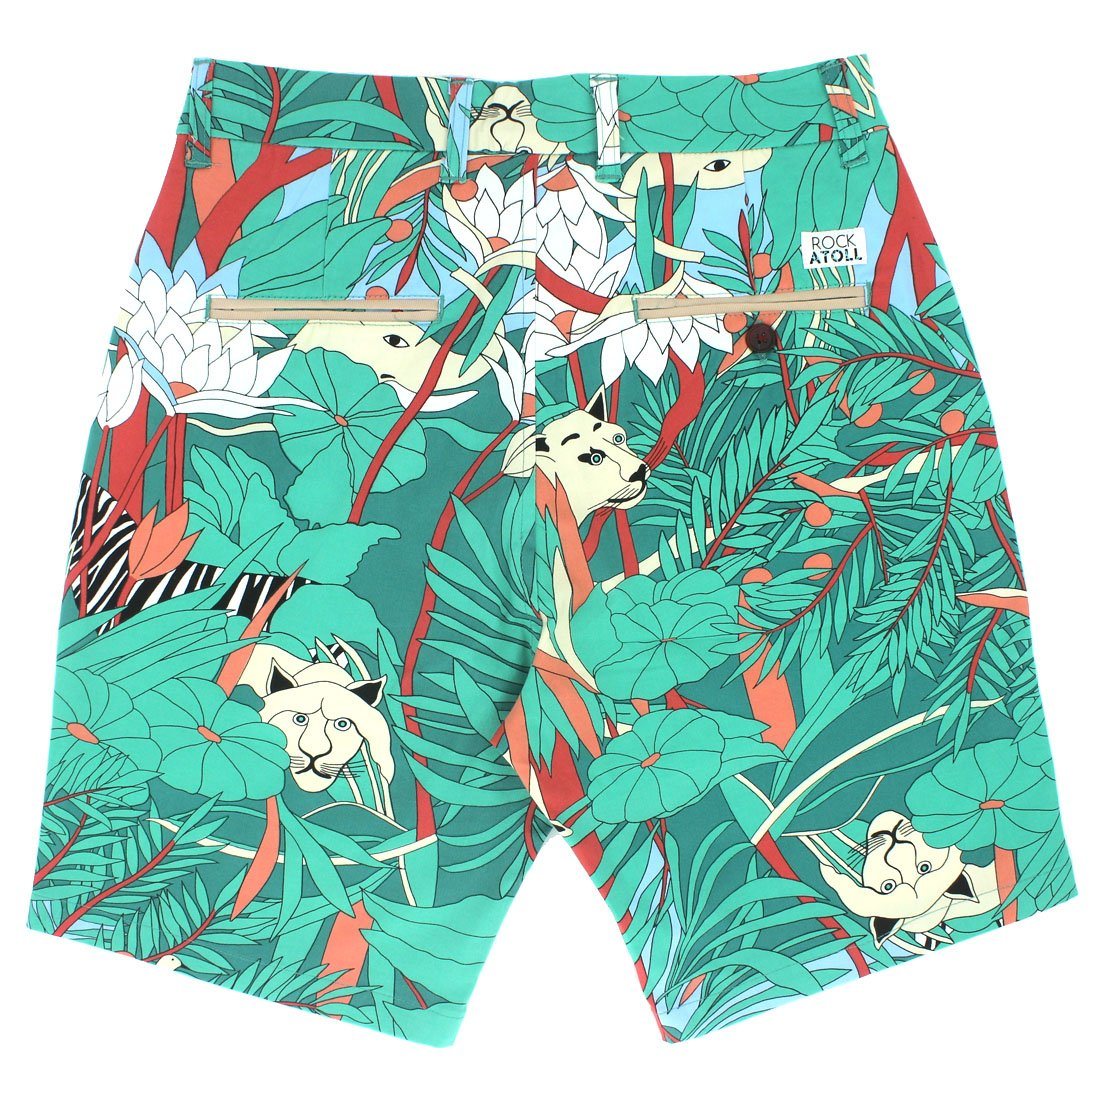 Jungle Shorts For Men. Buy Mens Shorts Online. New Style | Rock Atoll